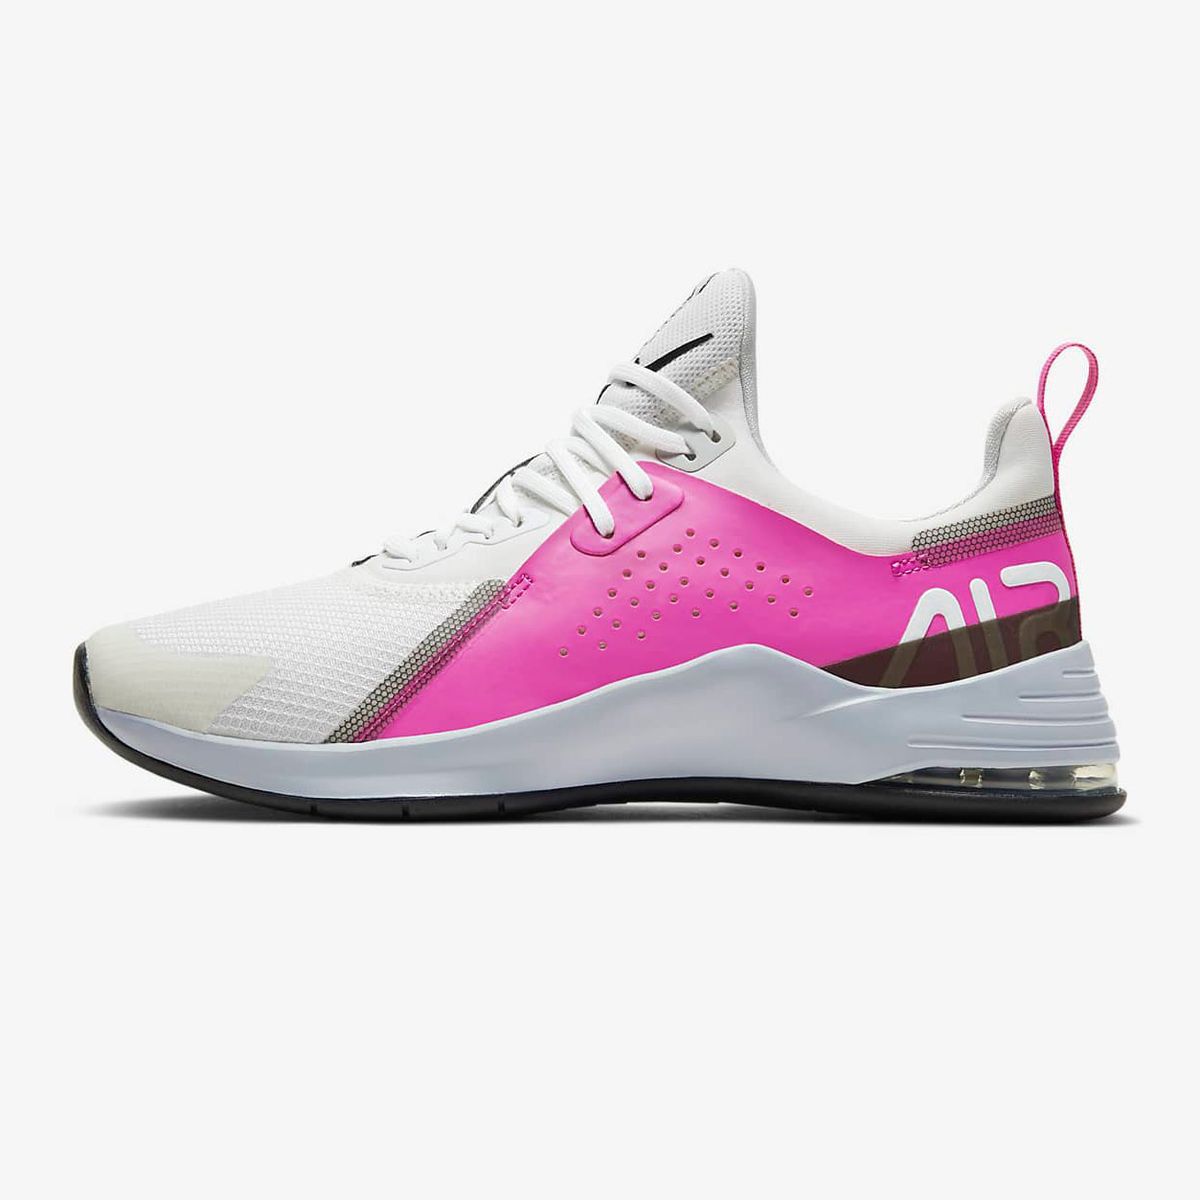 30 Best Workout Shoes for Women 2022 